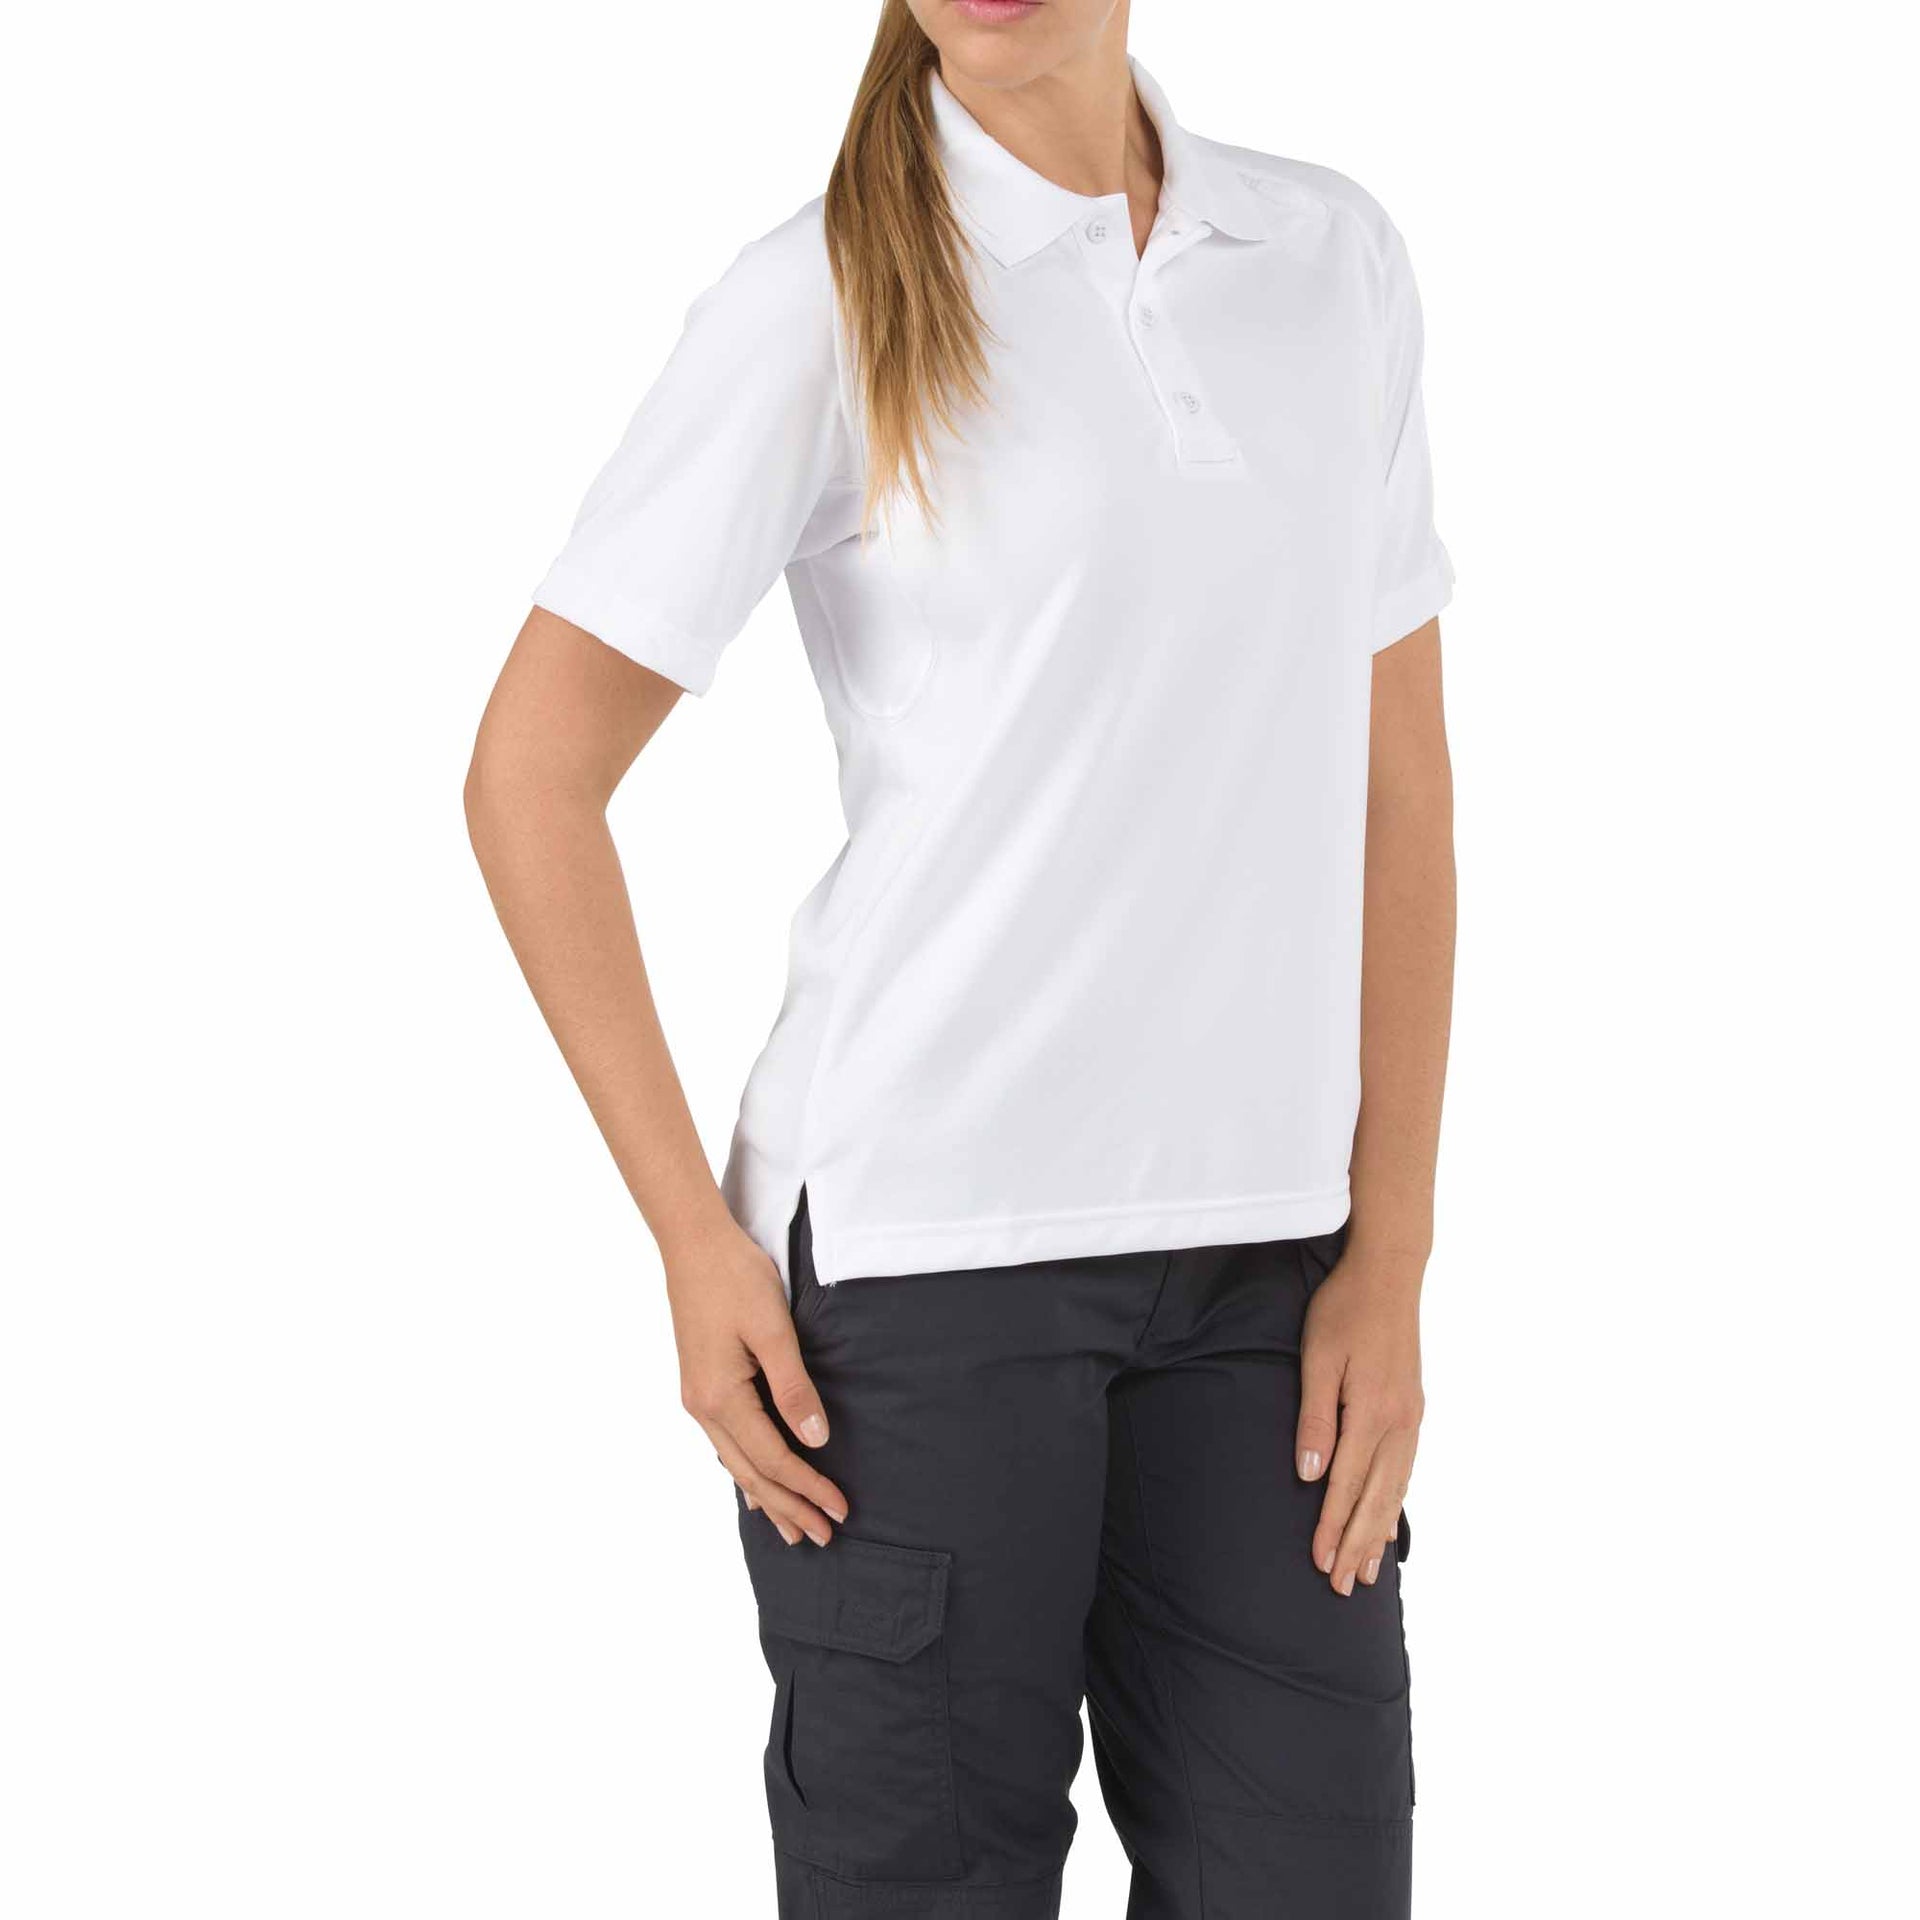 5.11 Tactical Women’s Performance Short Sleeve Polo (61165) | FREE SHIPPING | A new standard in high performance, moisture wicking polo shirts, our Performance line of polyester polo shirts provide superior moisture management technology and quick drying characteristics that allow you to operate at peak levels while remaining cool, comfortable, and in control throughout your shift.